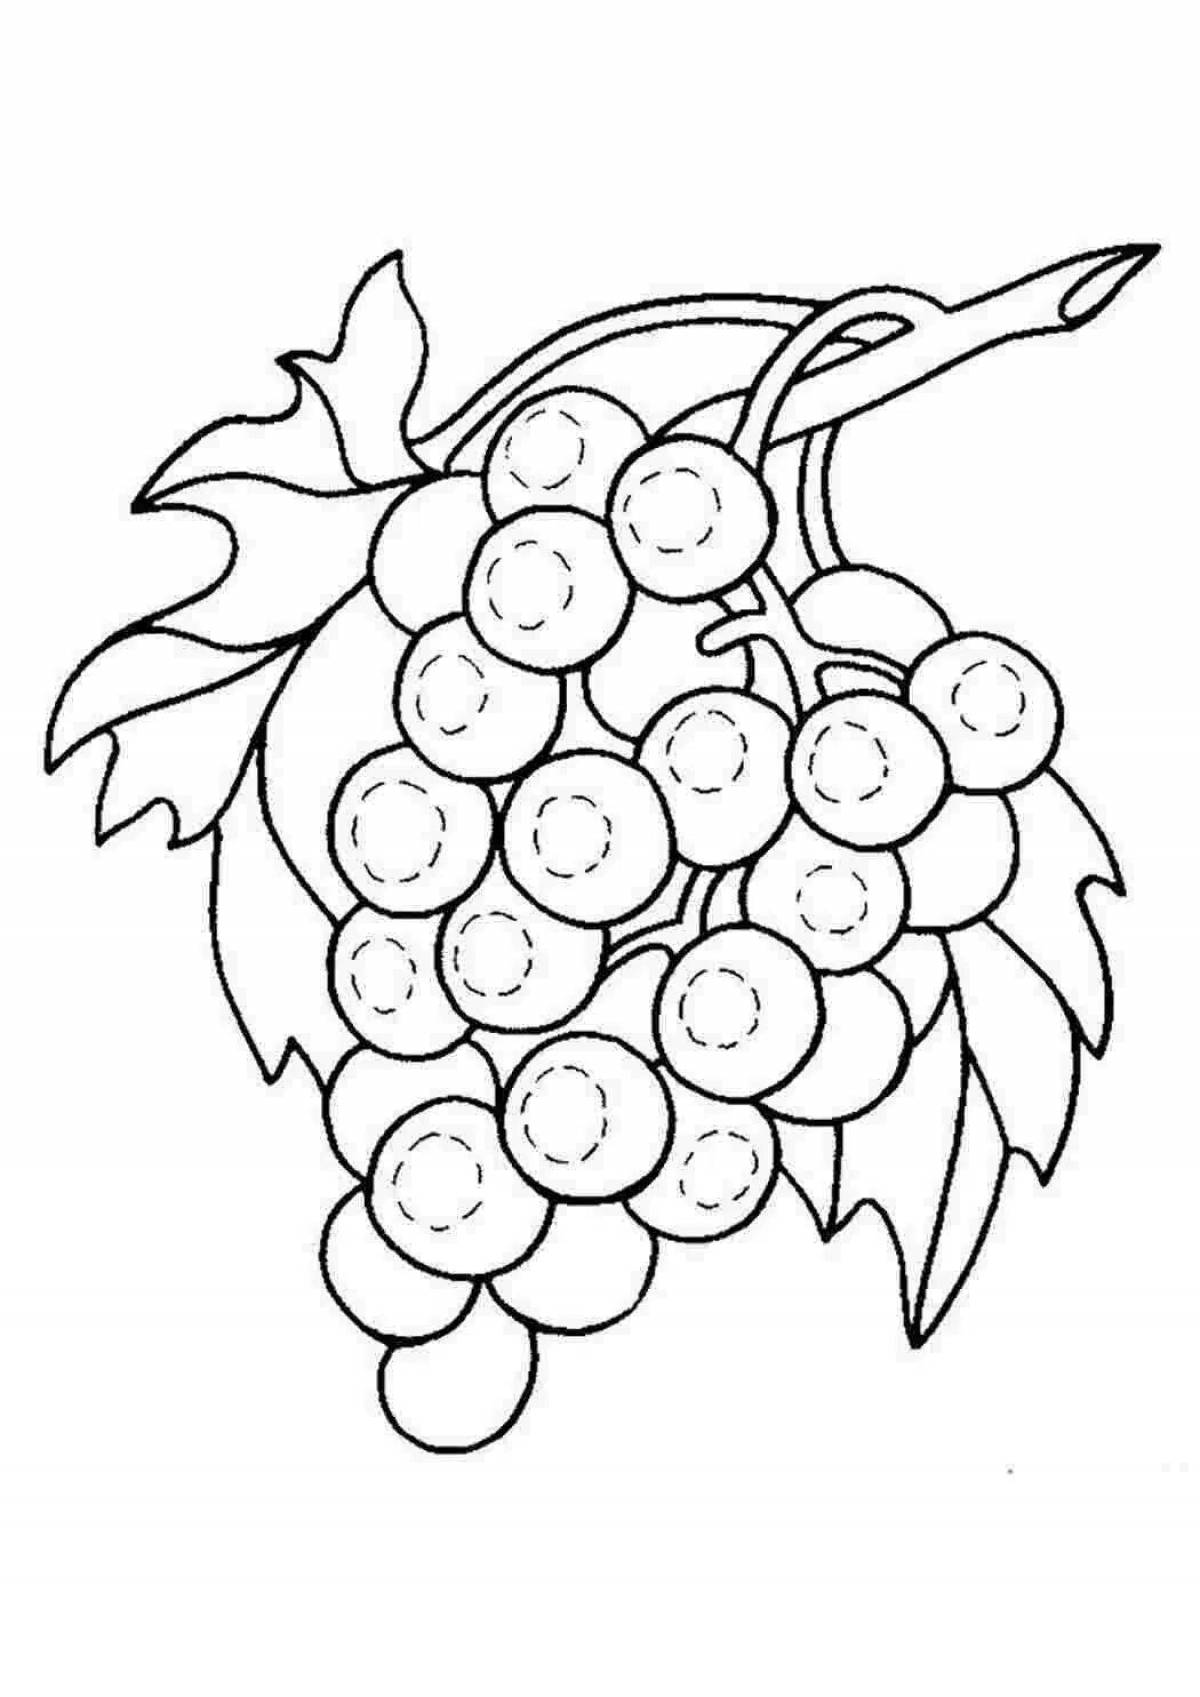 Playful grape coloring page for 5-6 year olds